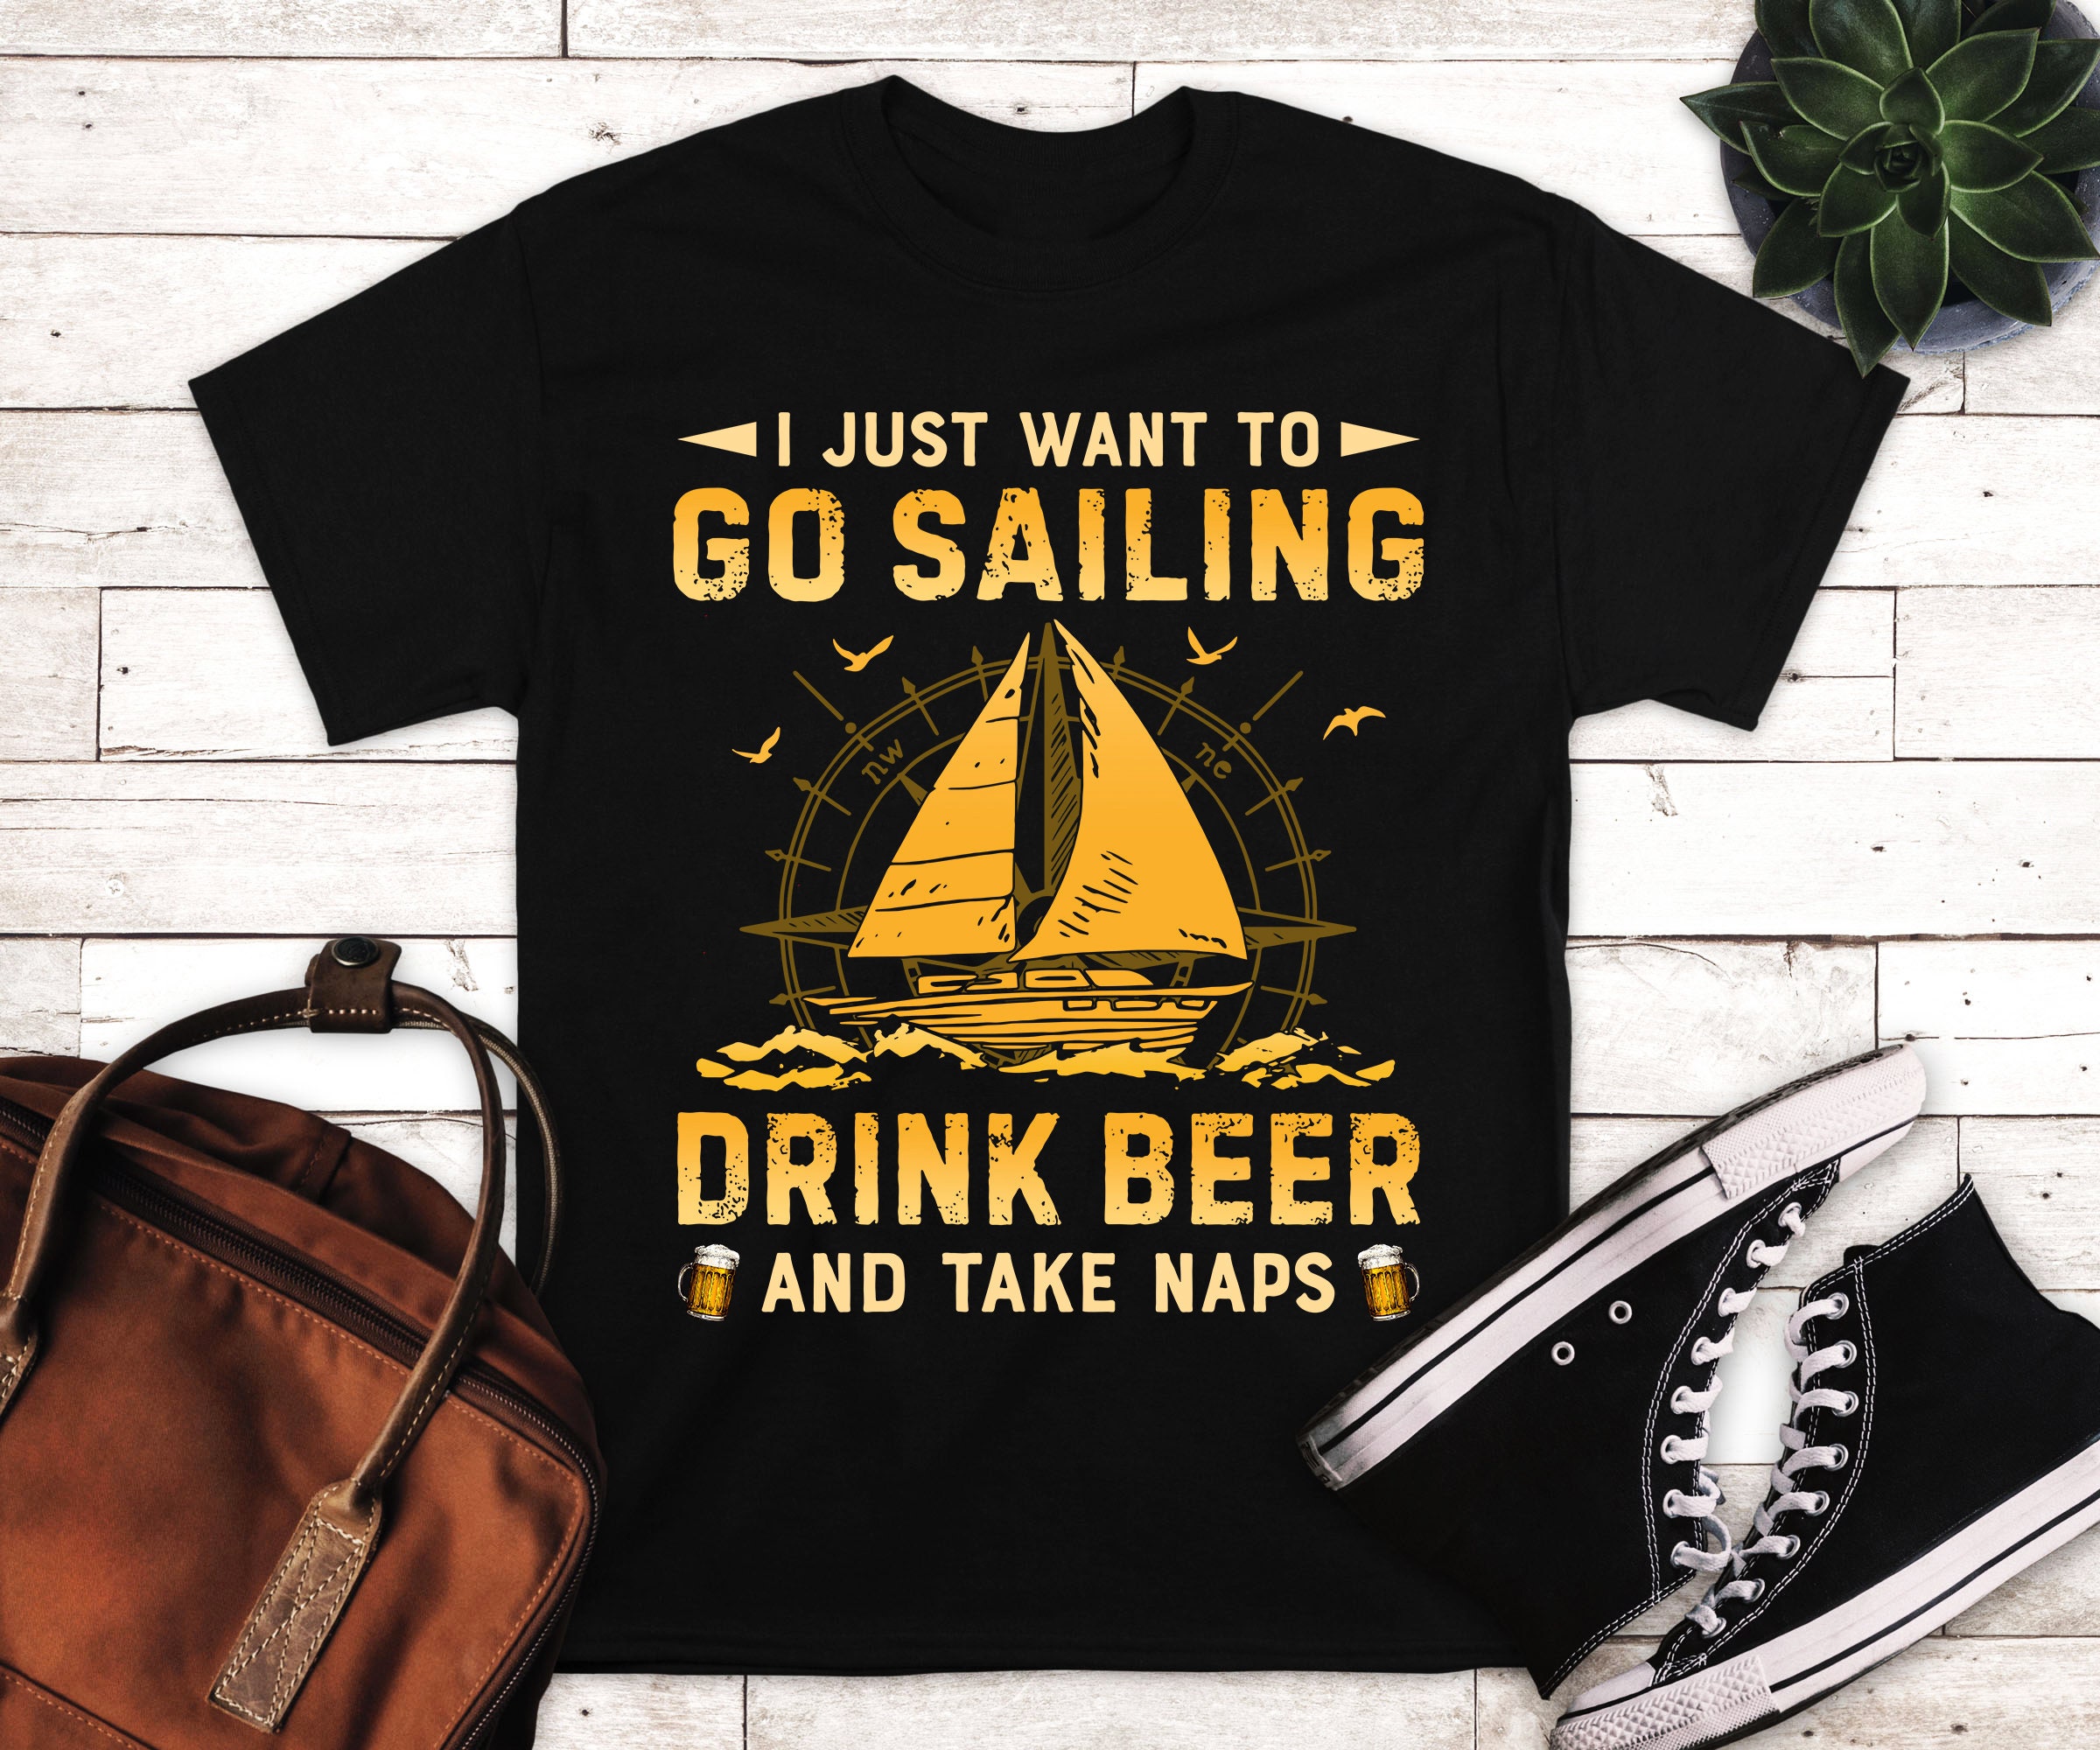 Just Want To Go Sailing And Drink Beer Shirt Go Sailing | Etsy